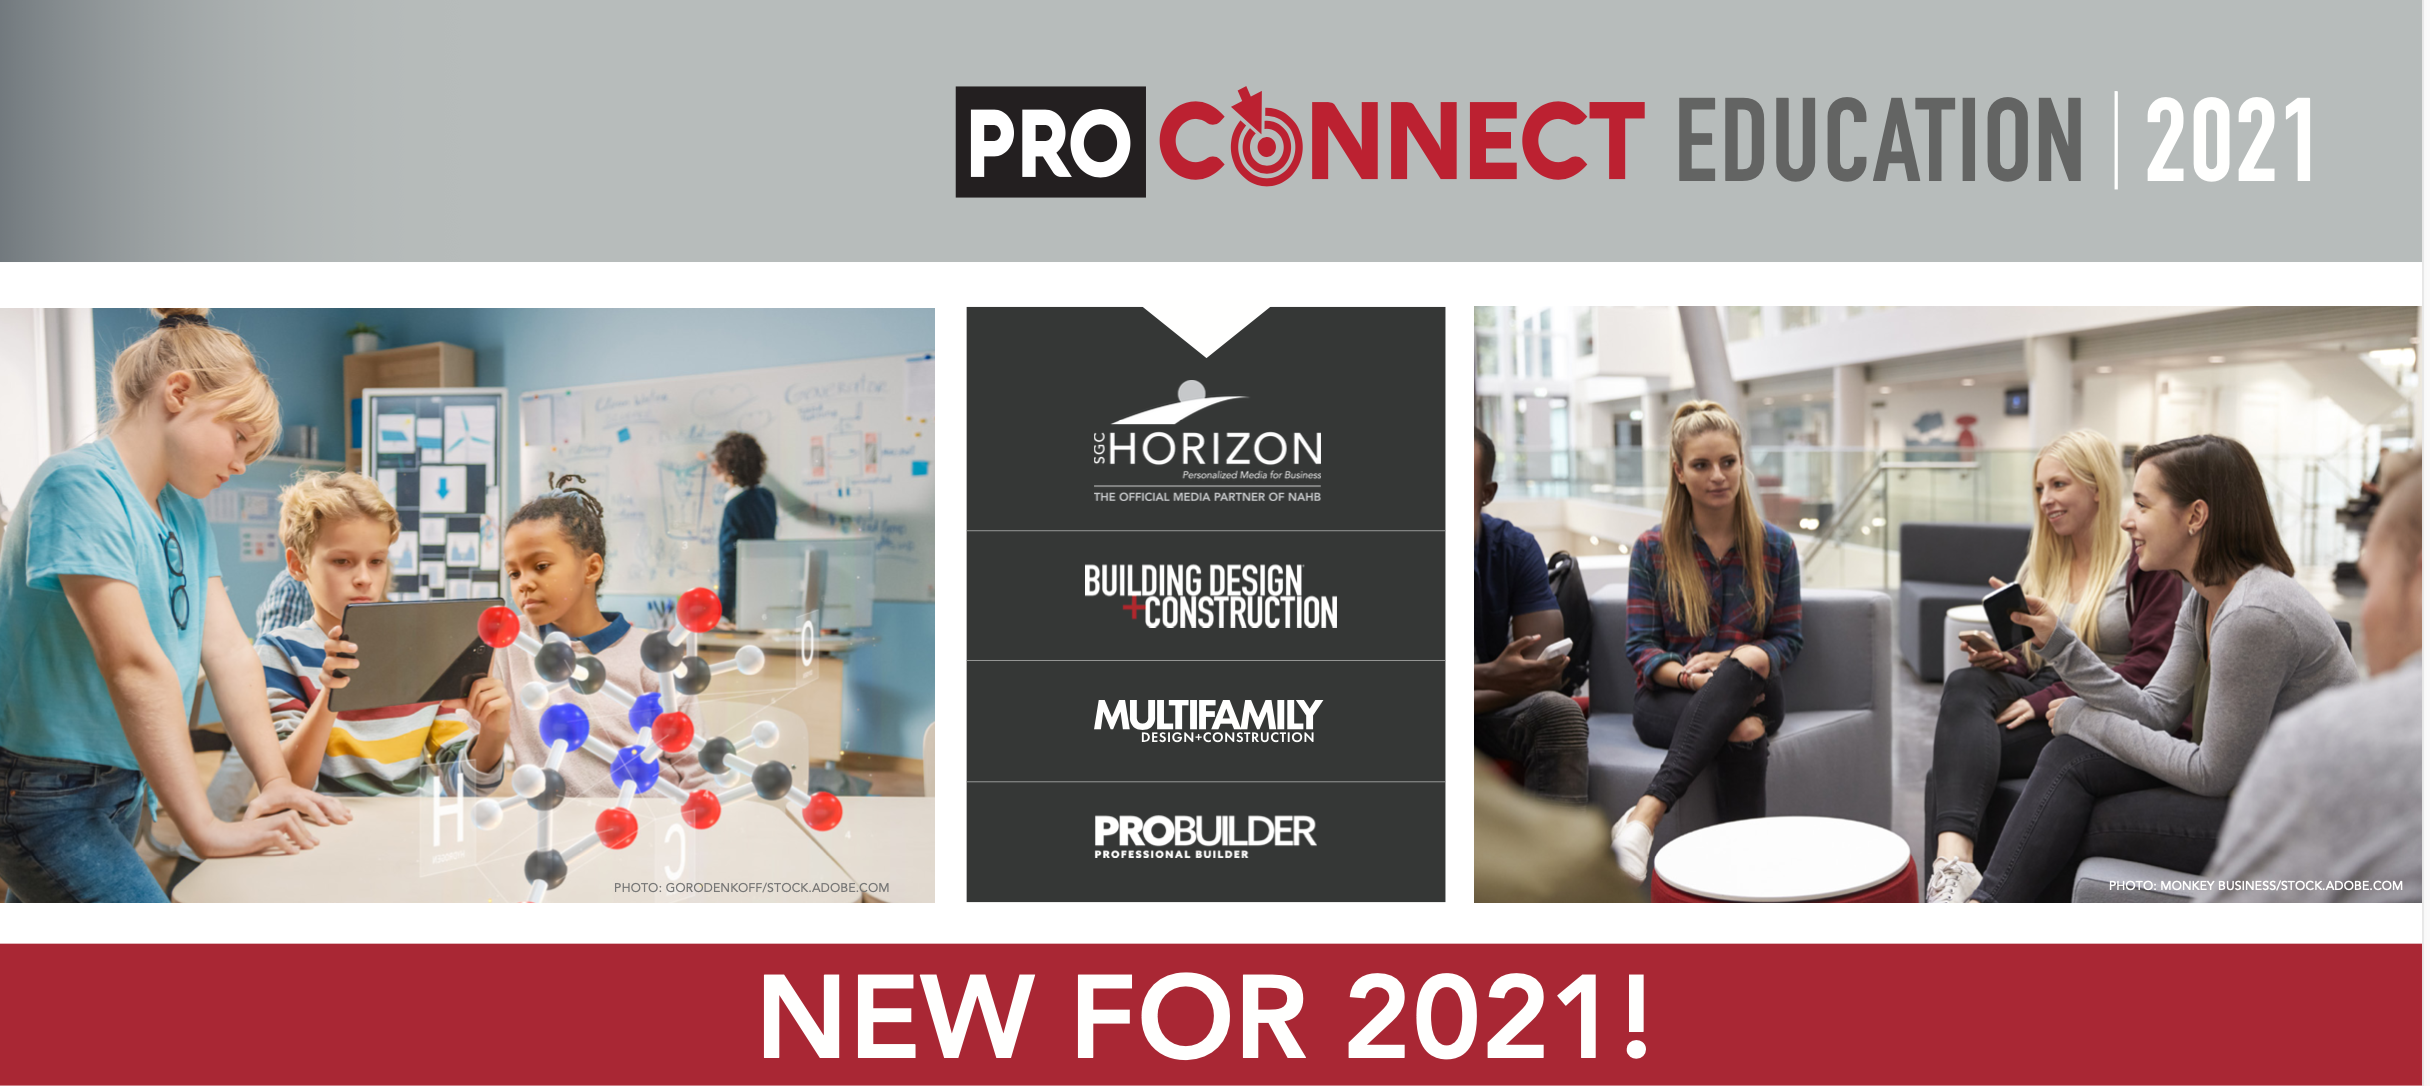 ProConnect Education (K-12 to University) will be held Nov 16-17, 2021.